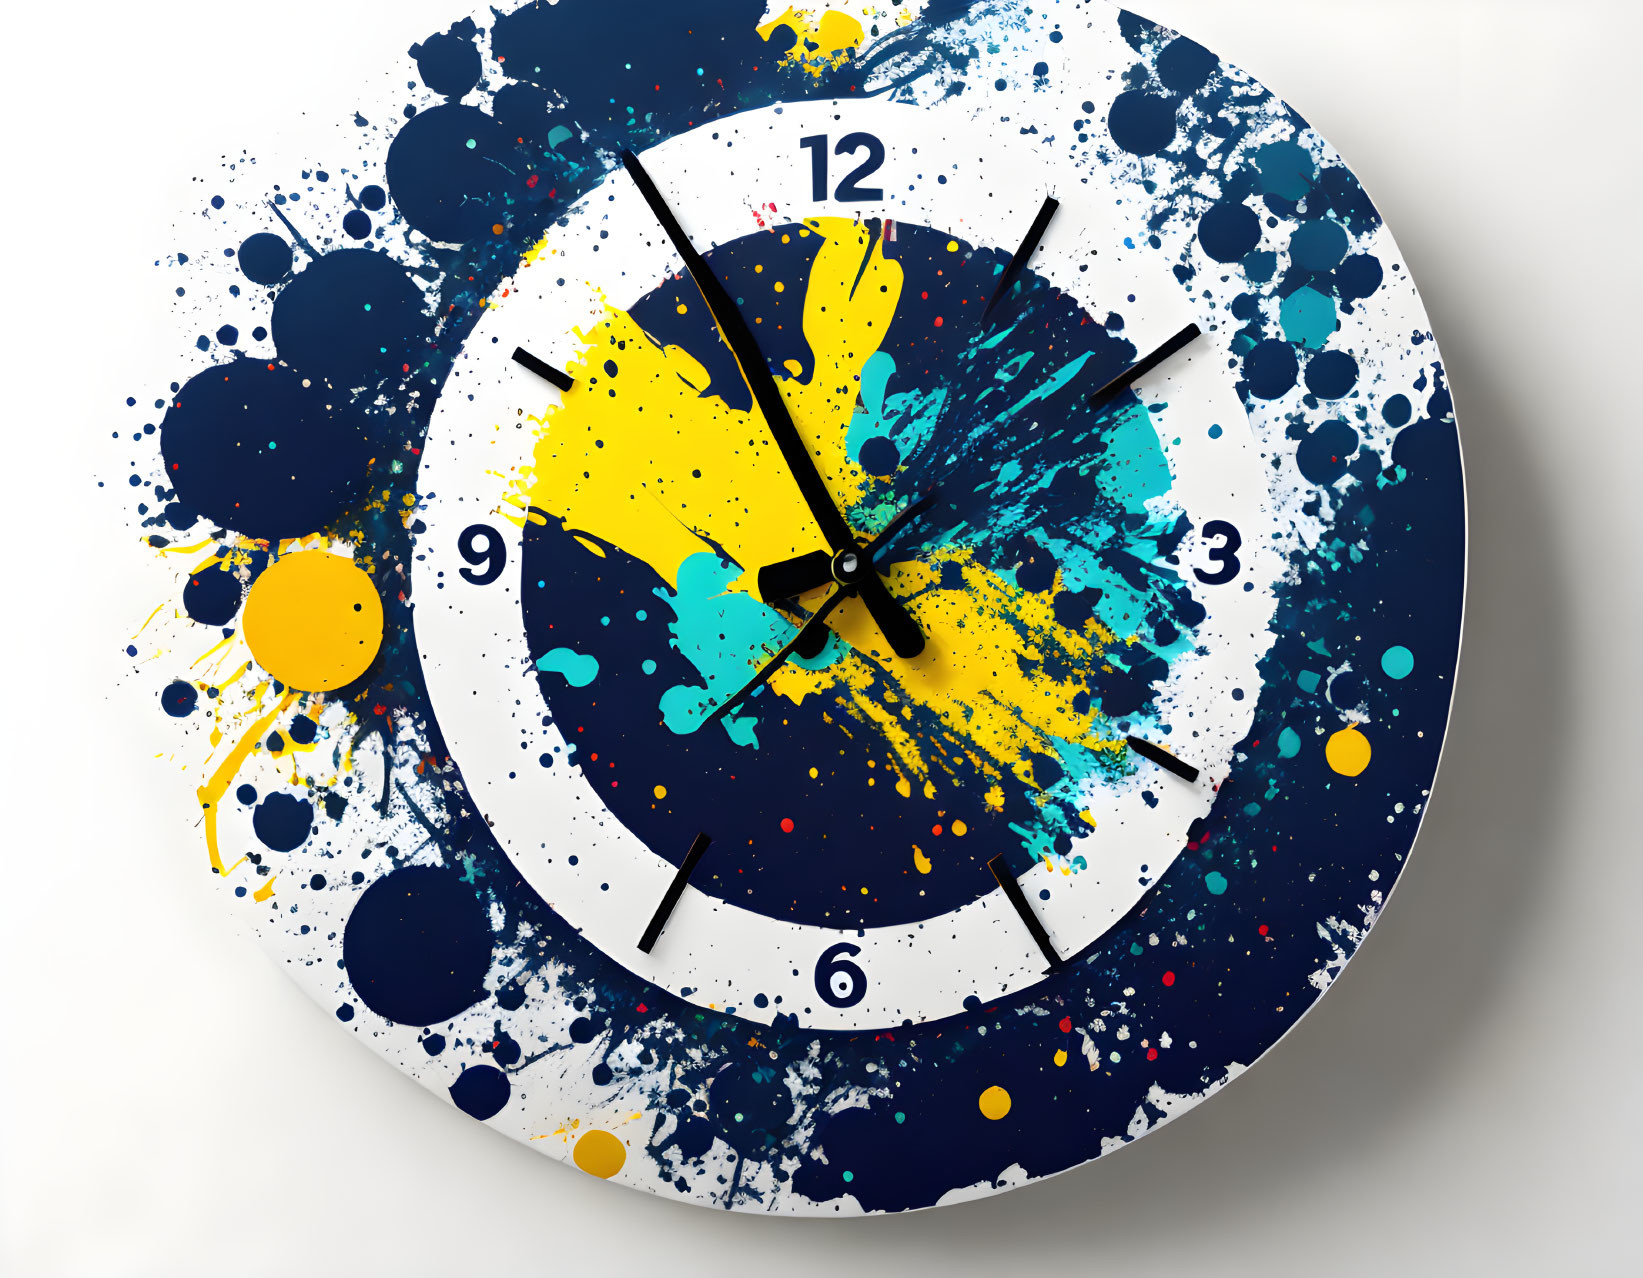 Colorful Splattered Paint Wall Clock in Blue, Yellow, and White Hues